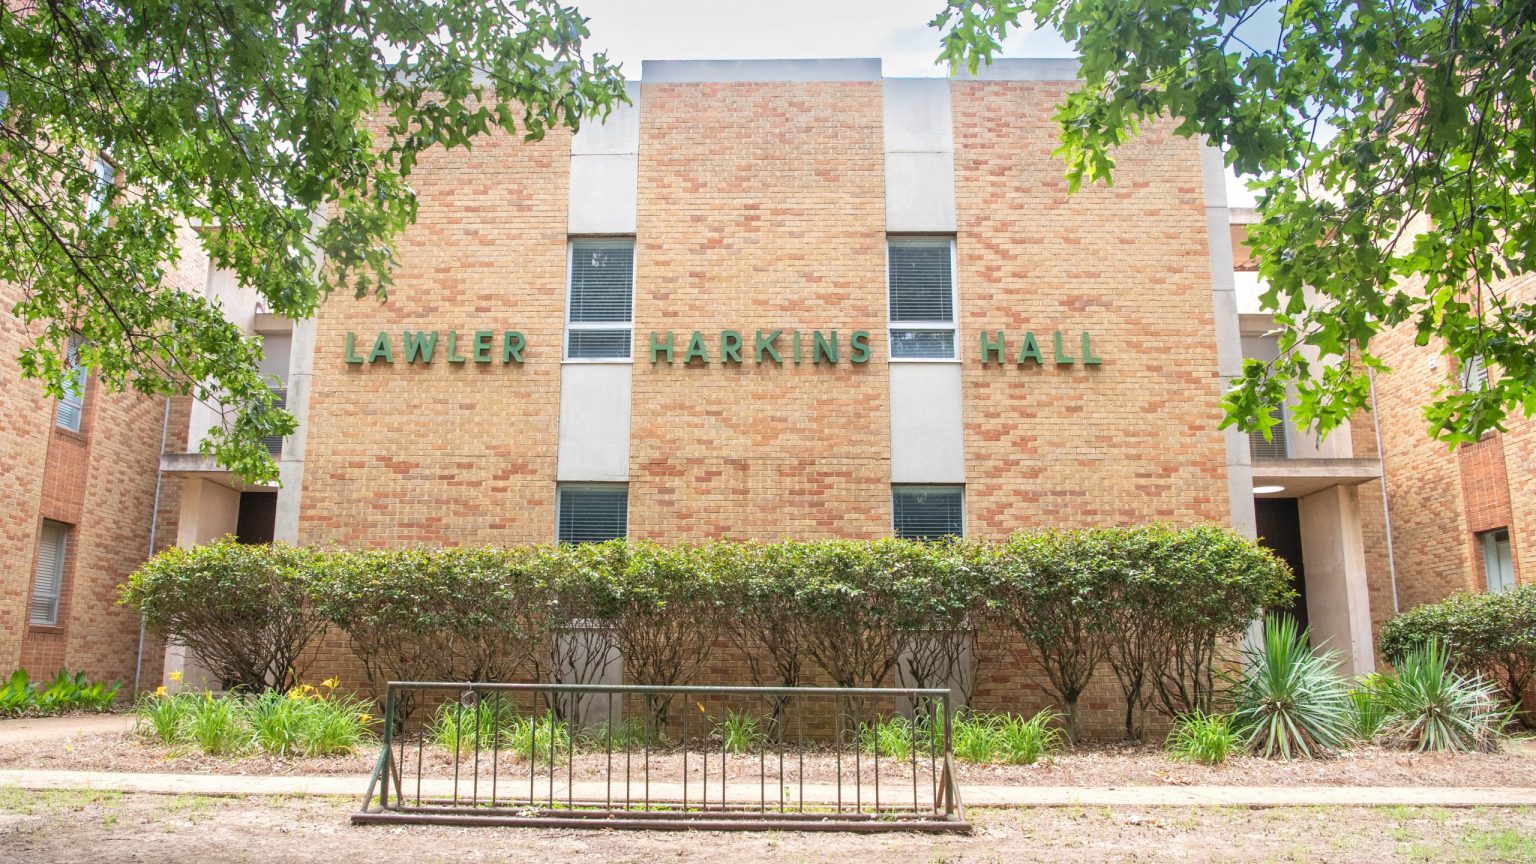 Exterior view of Lawler-Harkins residence hall.